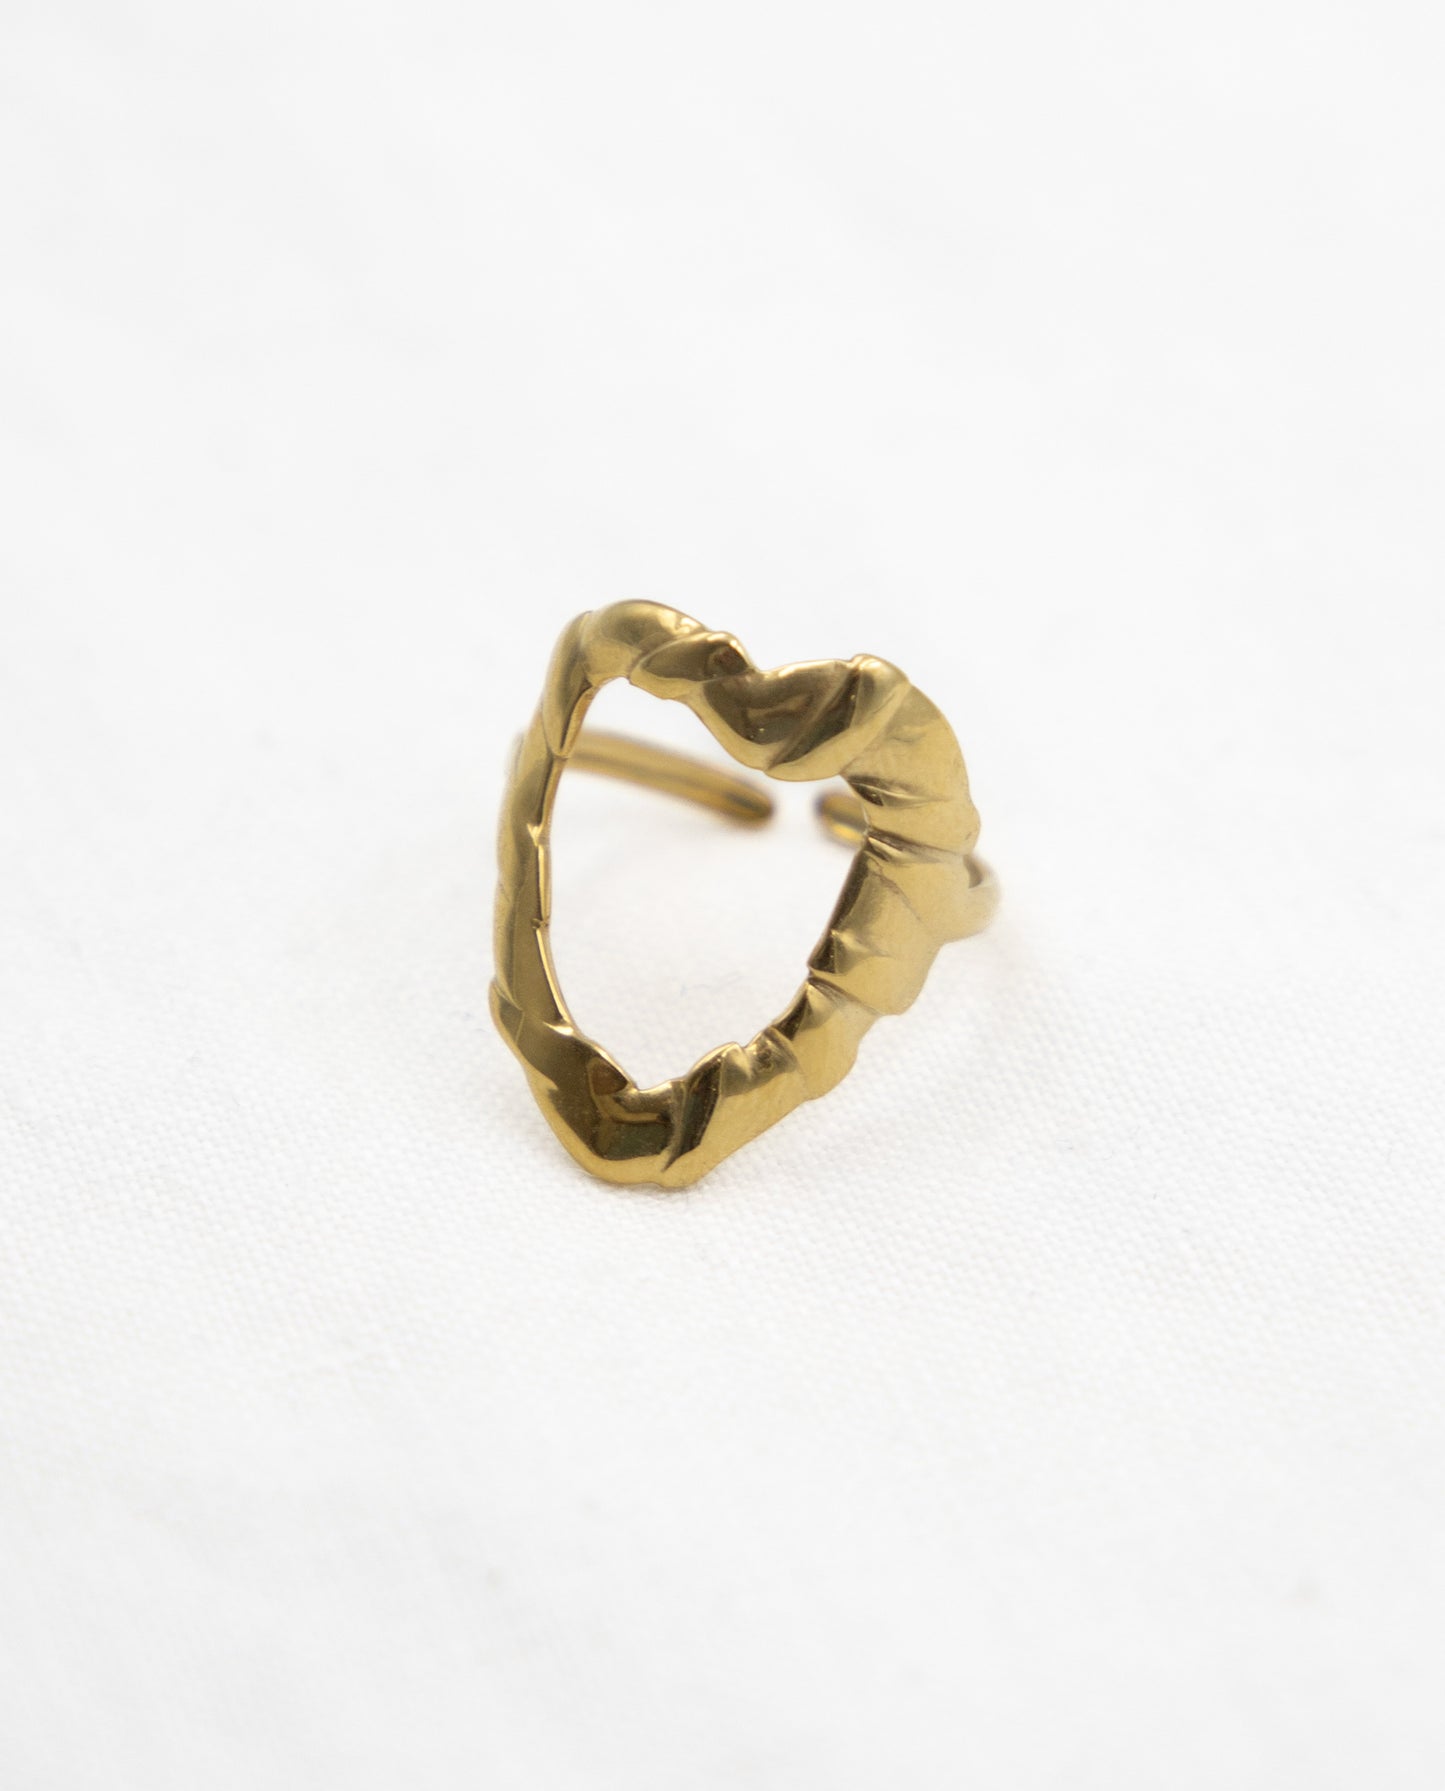 HEARTBEAT RING - GOLD